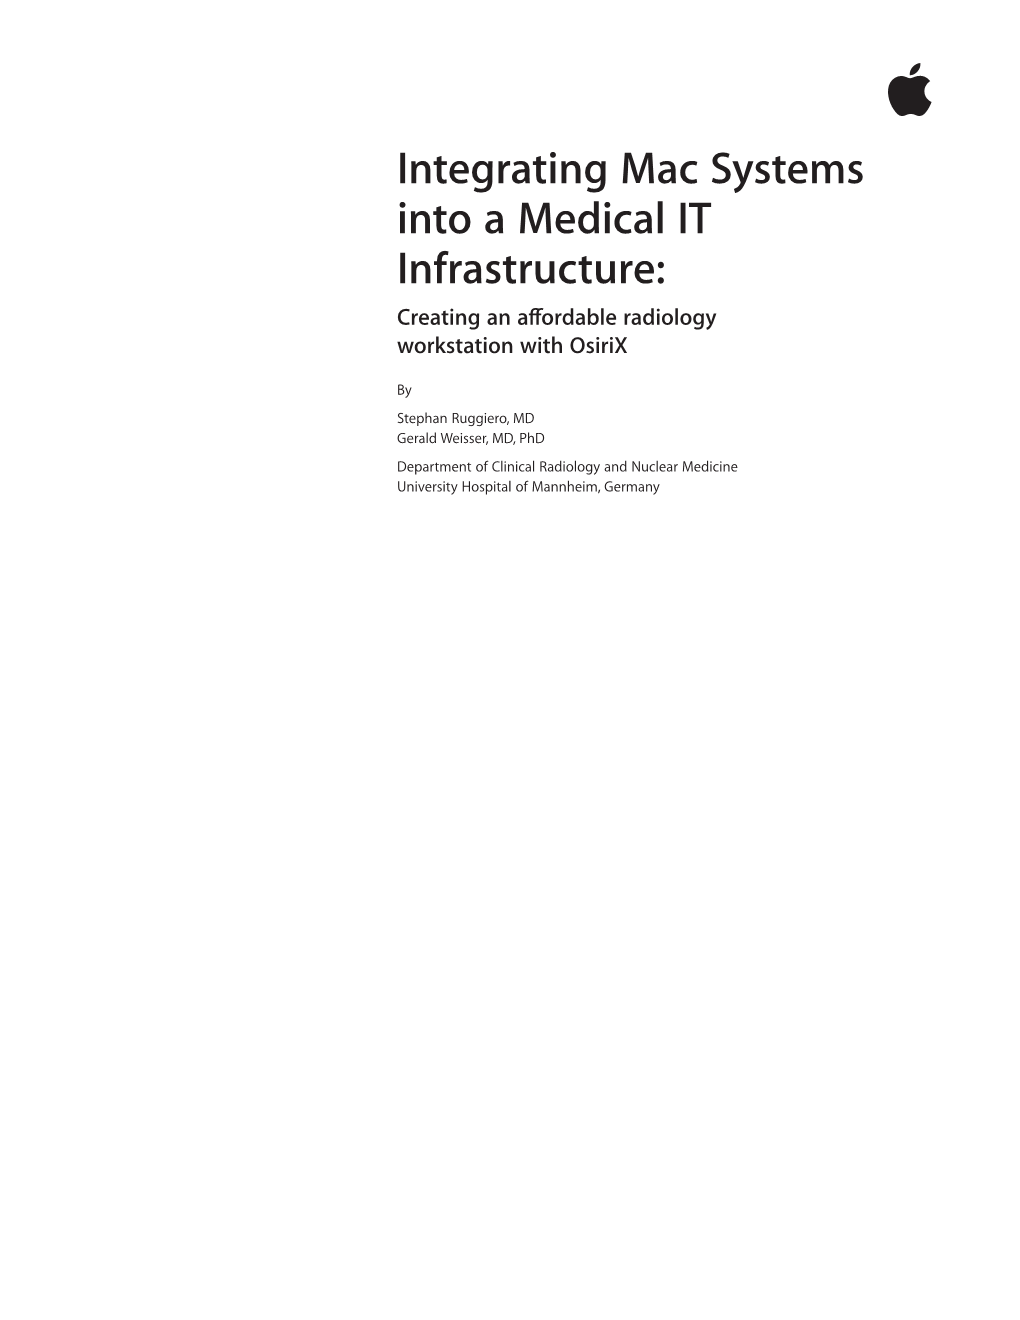 Integrating Mac Systems Into a Medical IT Infrastructure: Creating an Affordable Radiology Workstation with Osirix